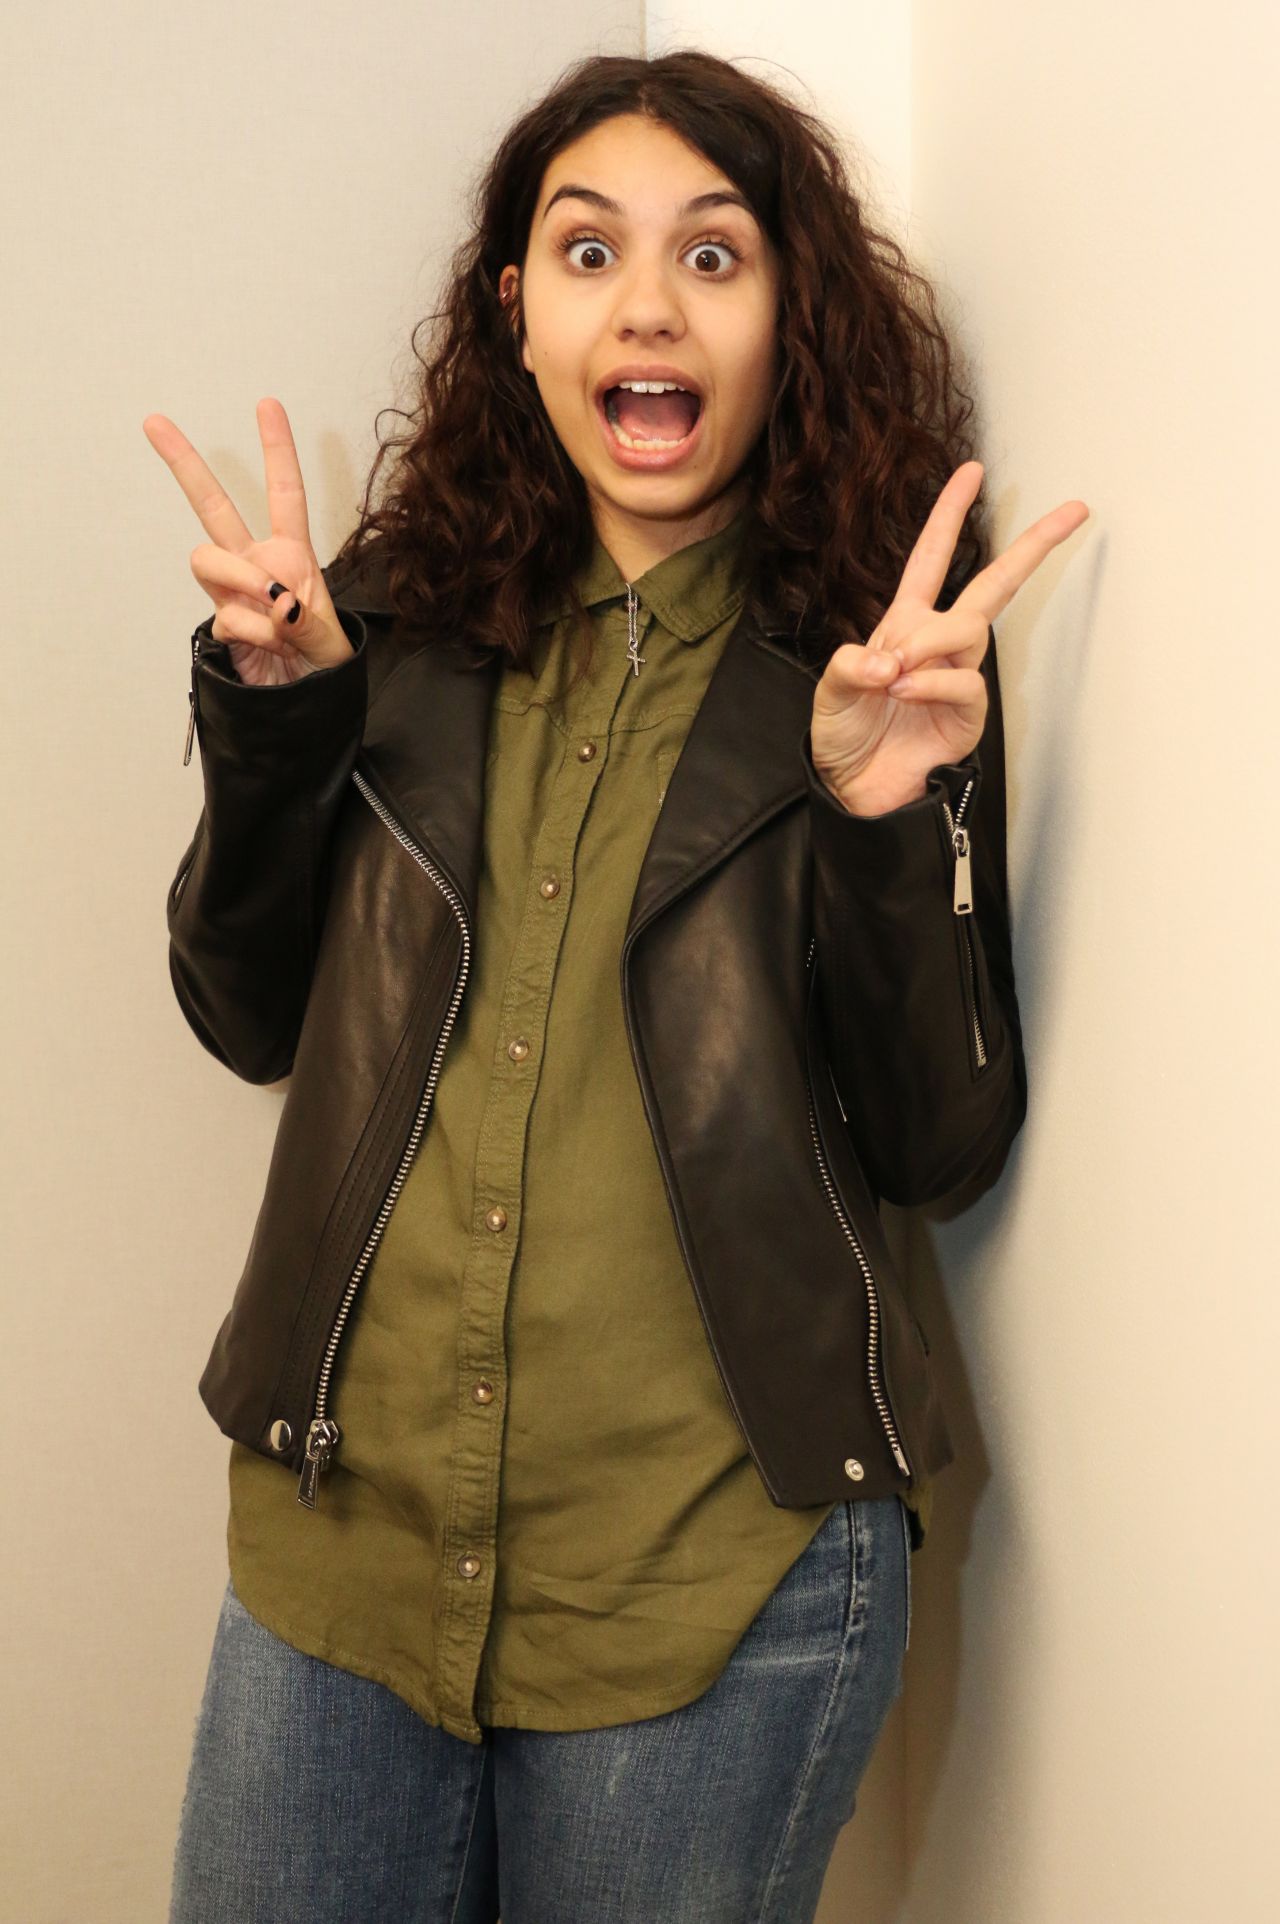 Alessia Cara - Backstage Before Her Performance at the Soho Apple Store in ...